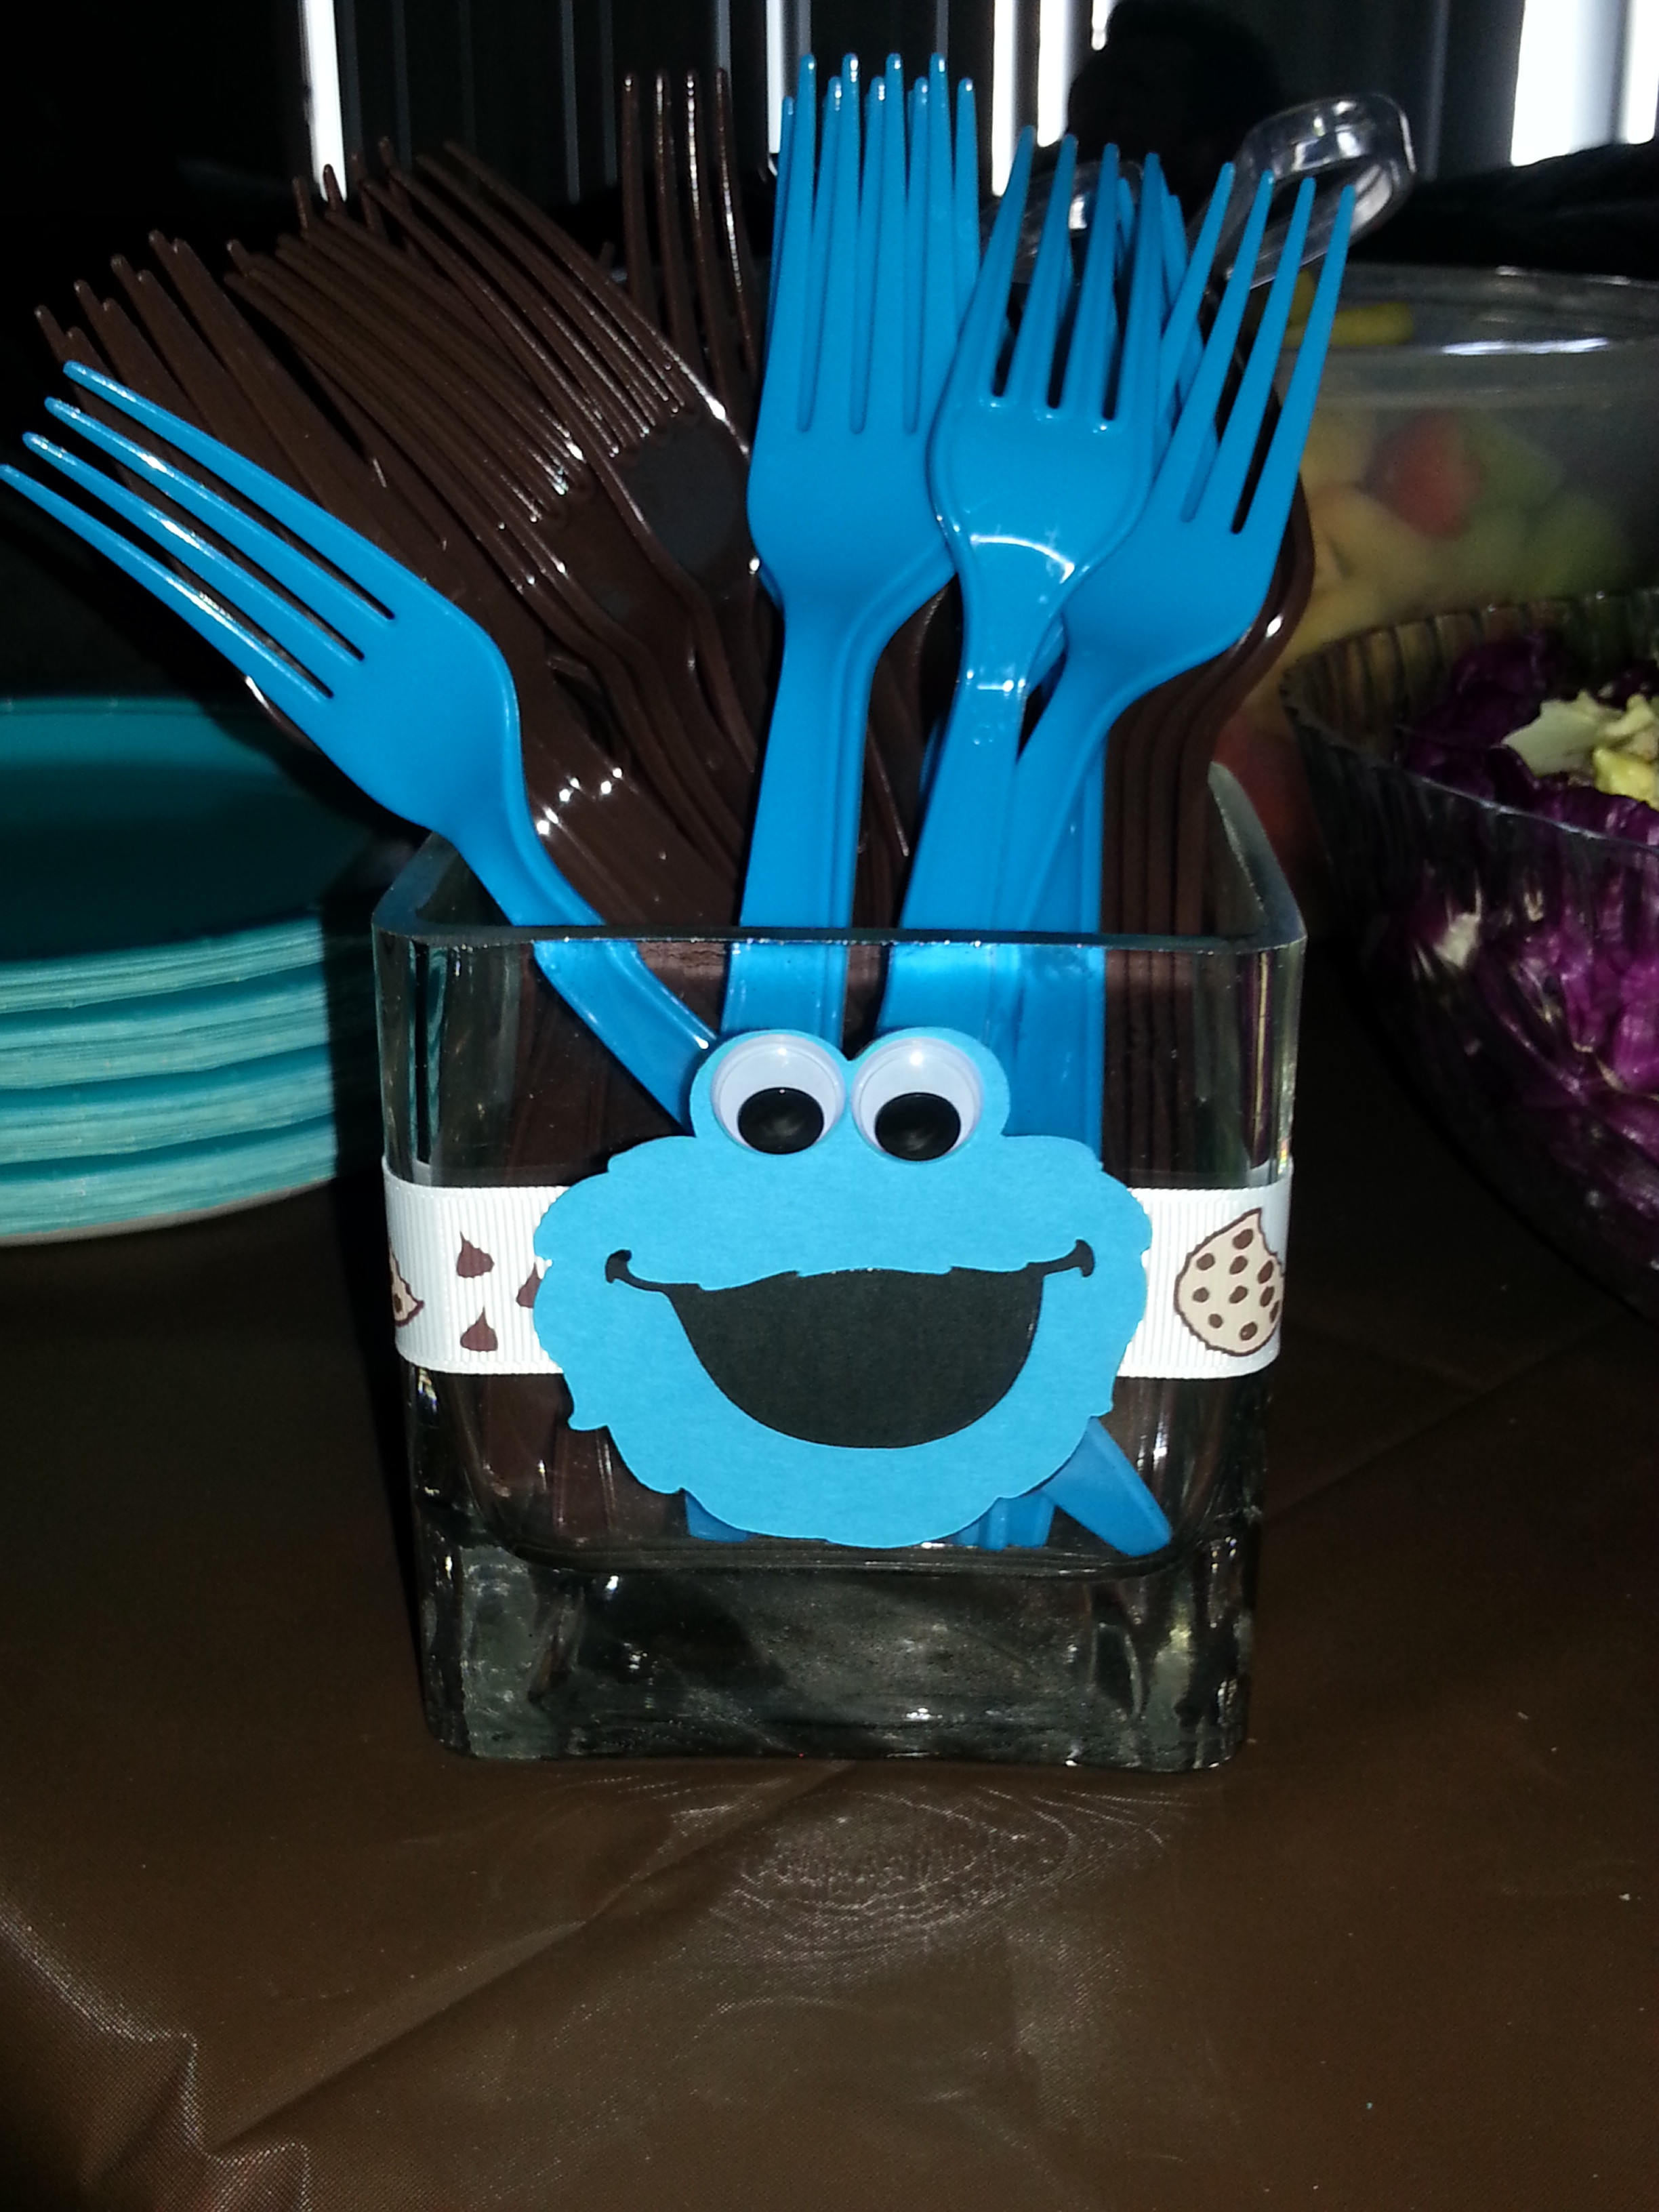 Cookie Monster Centerpiece & Table Setting I Decorated  Cookie monster  party decorations, Monster cookies, Cookie monster birthday party